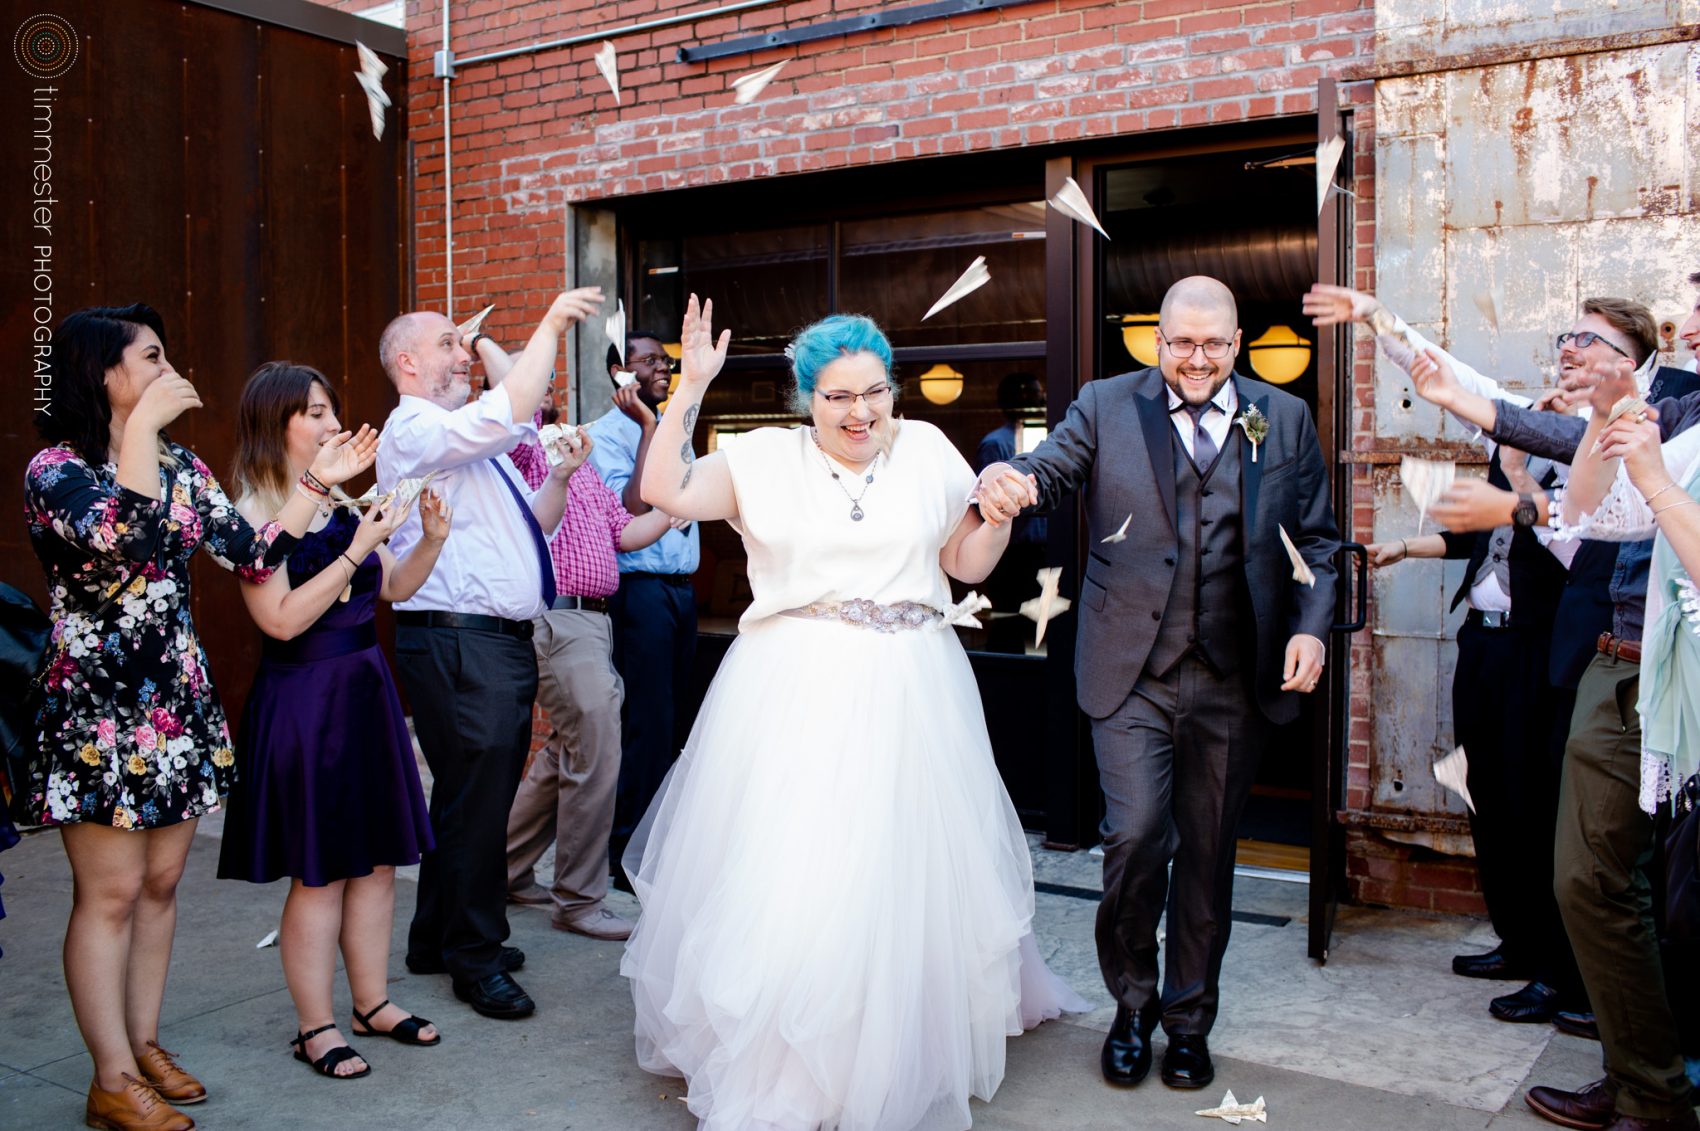 A fabulous paper plane wedding exit at The Cookery in Durham, NC.